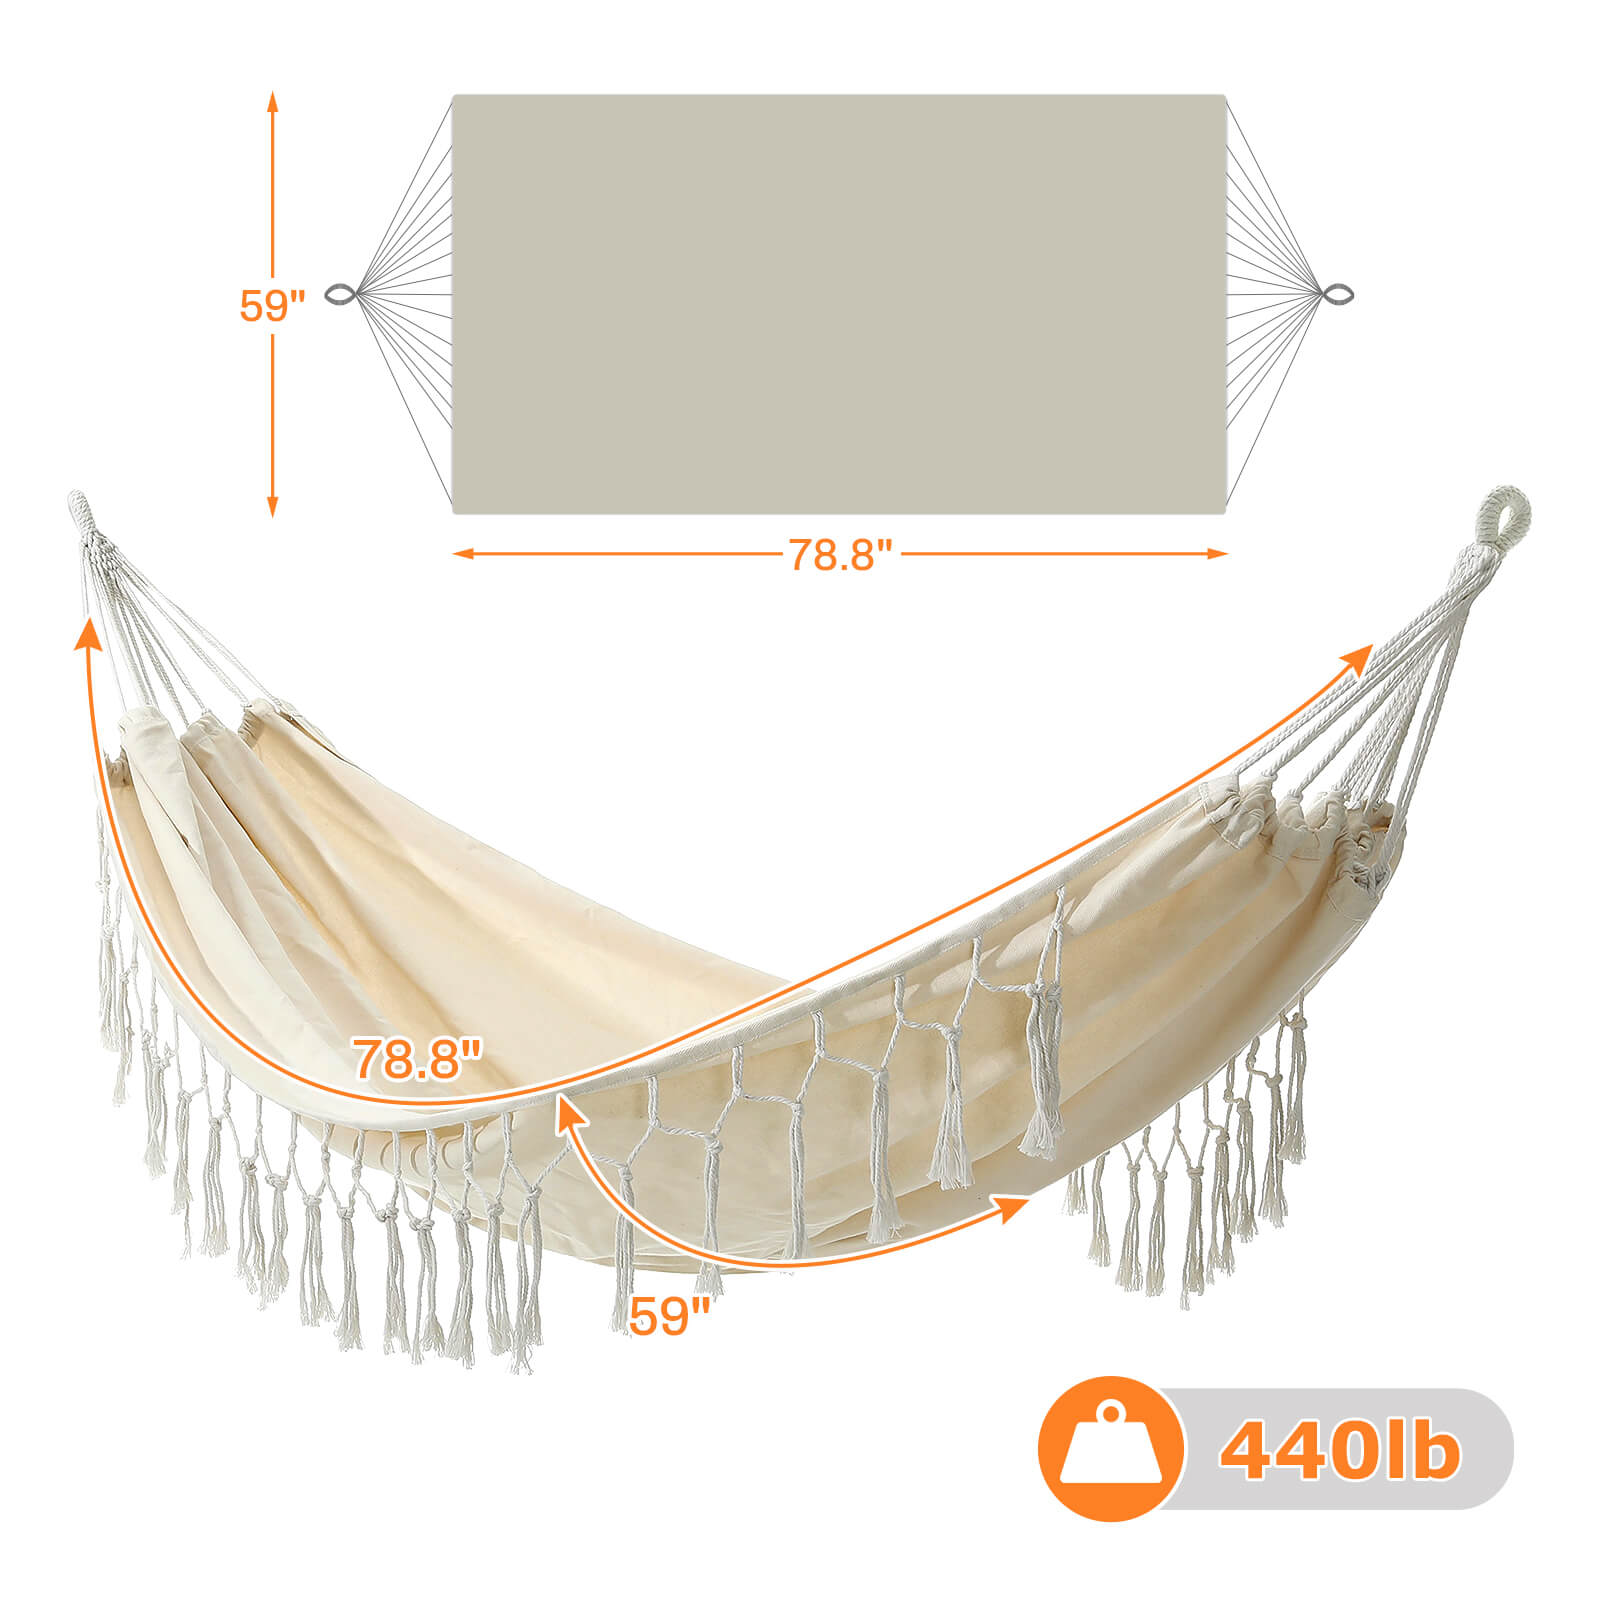 Portable Double Hammock Handmade Cotton Woven Balcony Hammock Hanging Rope Chair with Tassels and Storage Bag for Camping Hiking Backpacking Hunting Outdoor Beach